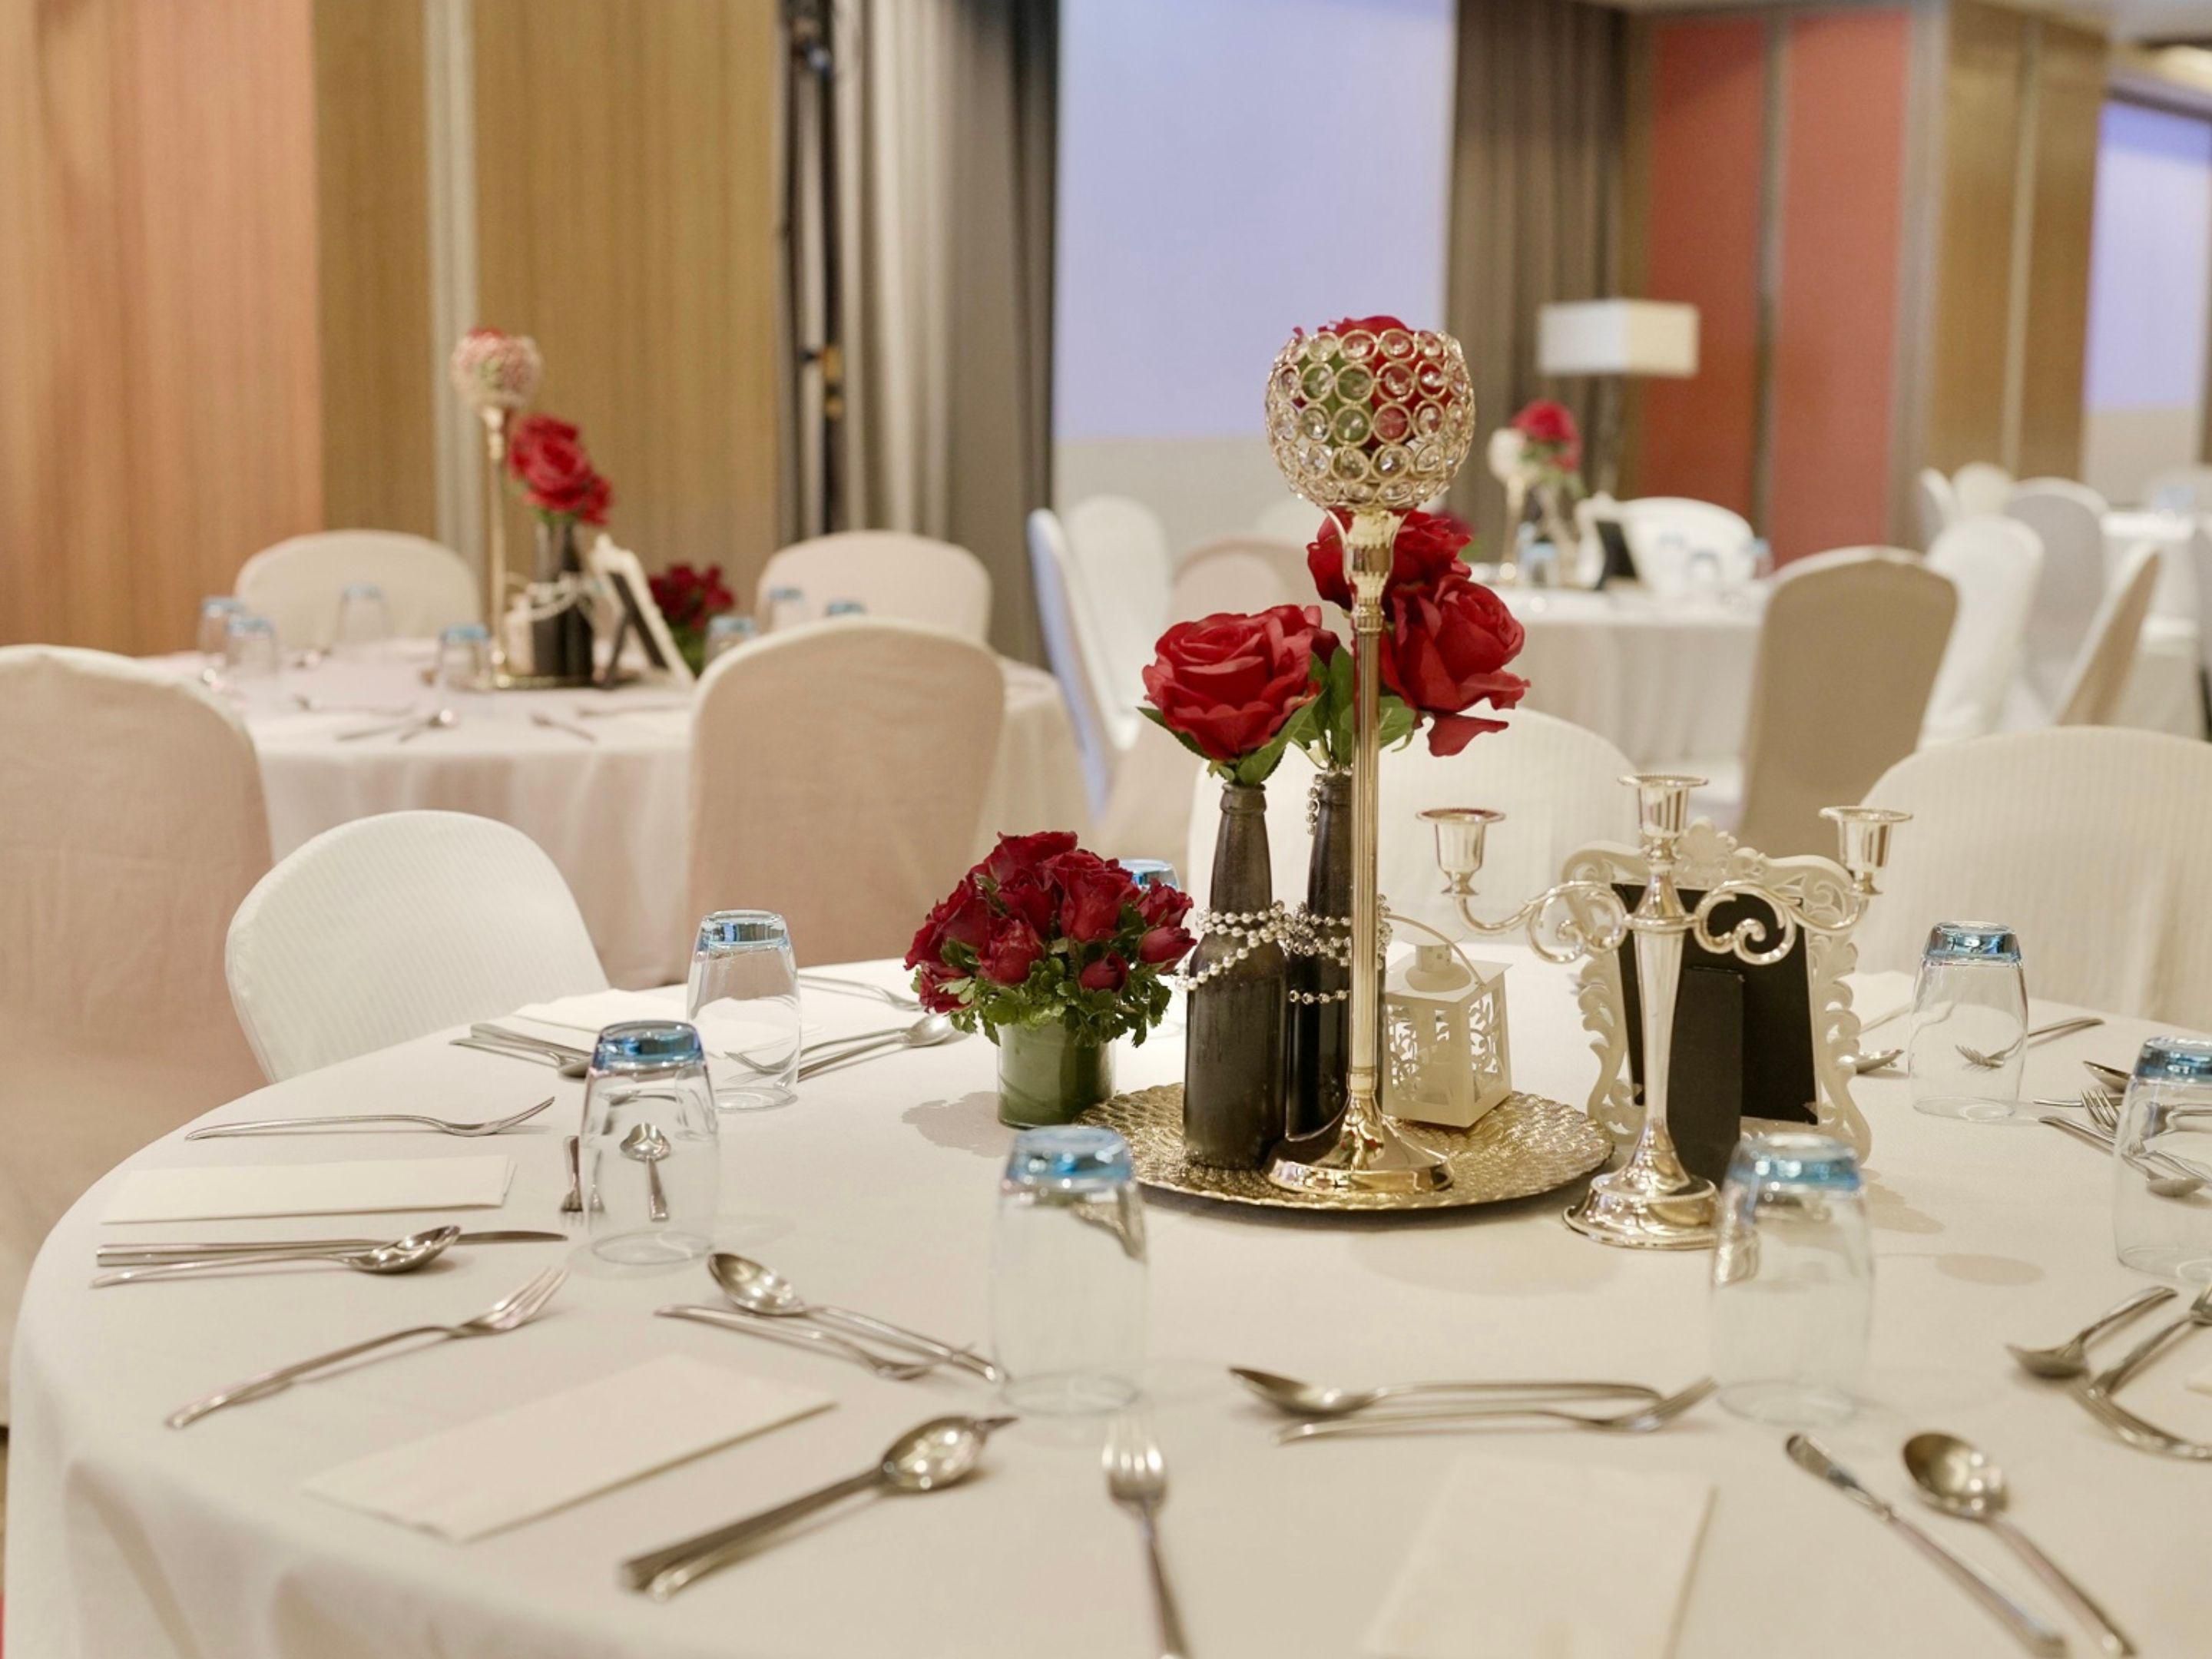 Plan your meetings & events with ease. Book any of Holiday Inn & Suites Makati's 8 fully-equipped function rooms for your next event.